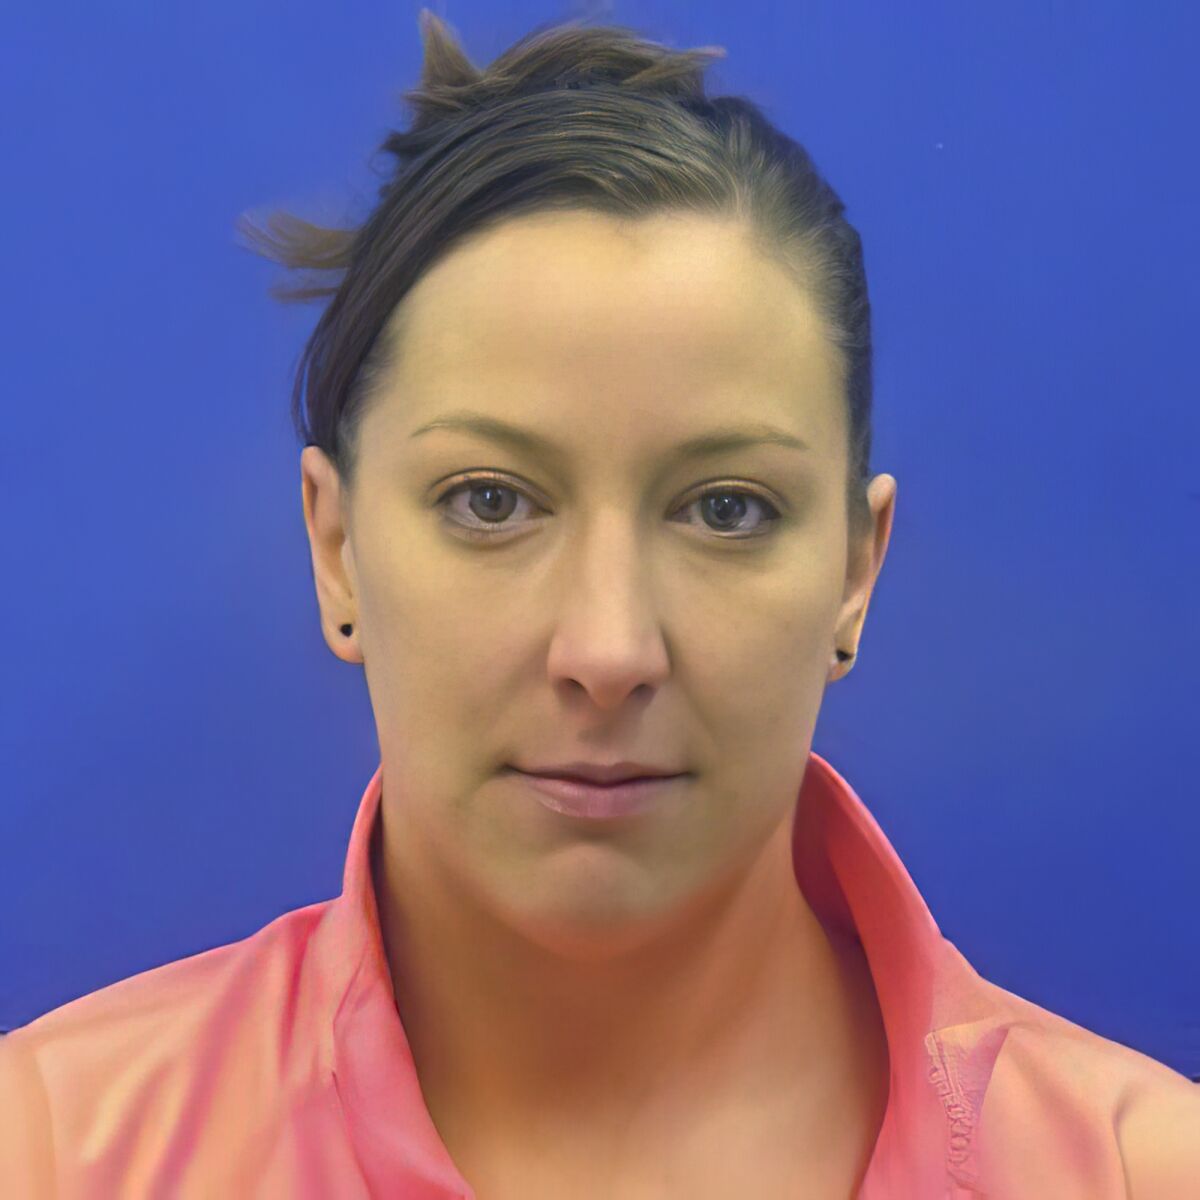 A woman in a license photo in front of a blue background